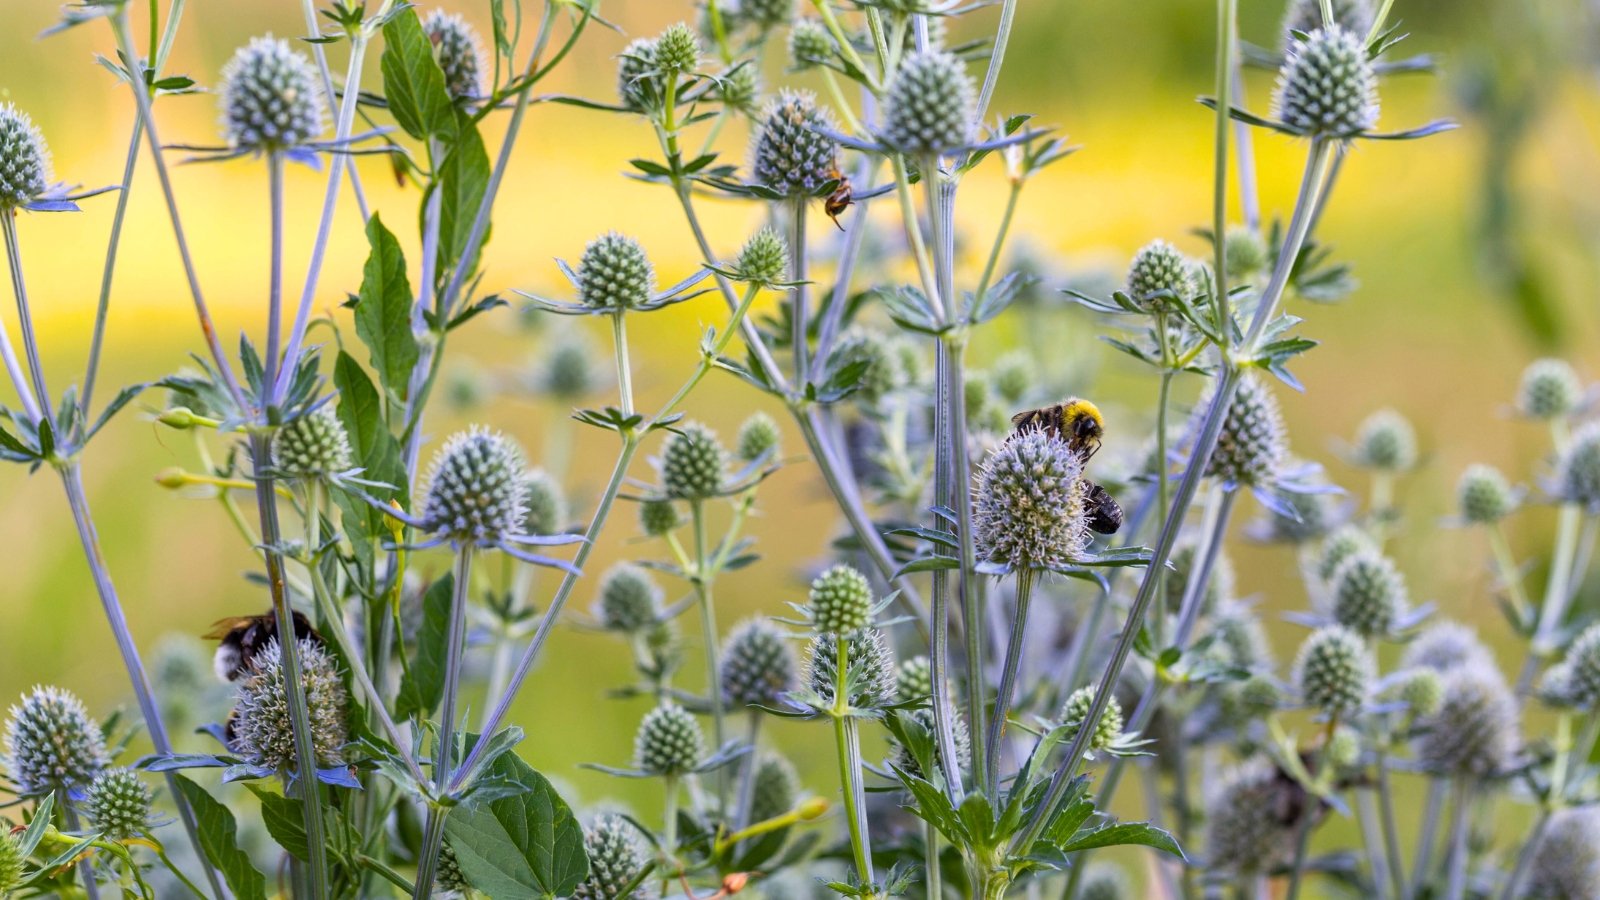 Eryngium planum features stiff, spiky stems and spiny, blue-green foliage, crowned with globe-shaped, metallic blue flower heads.